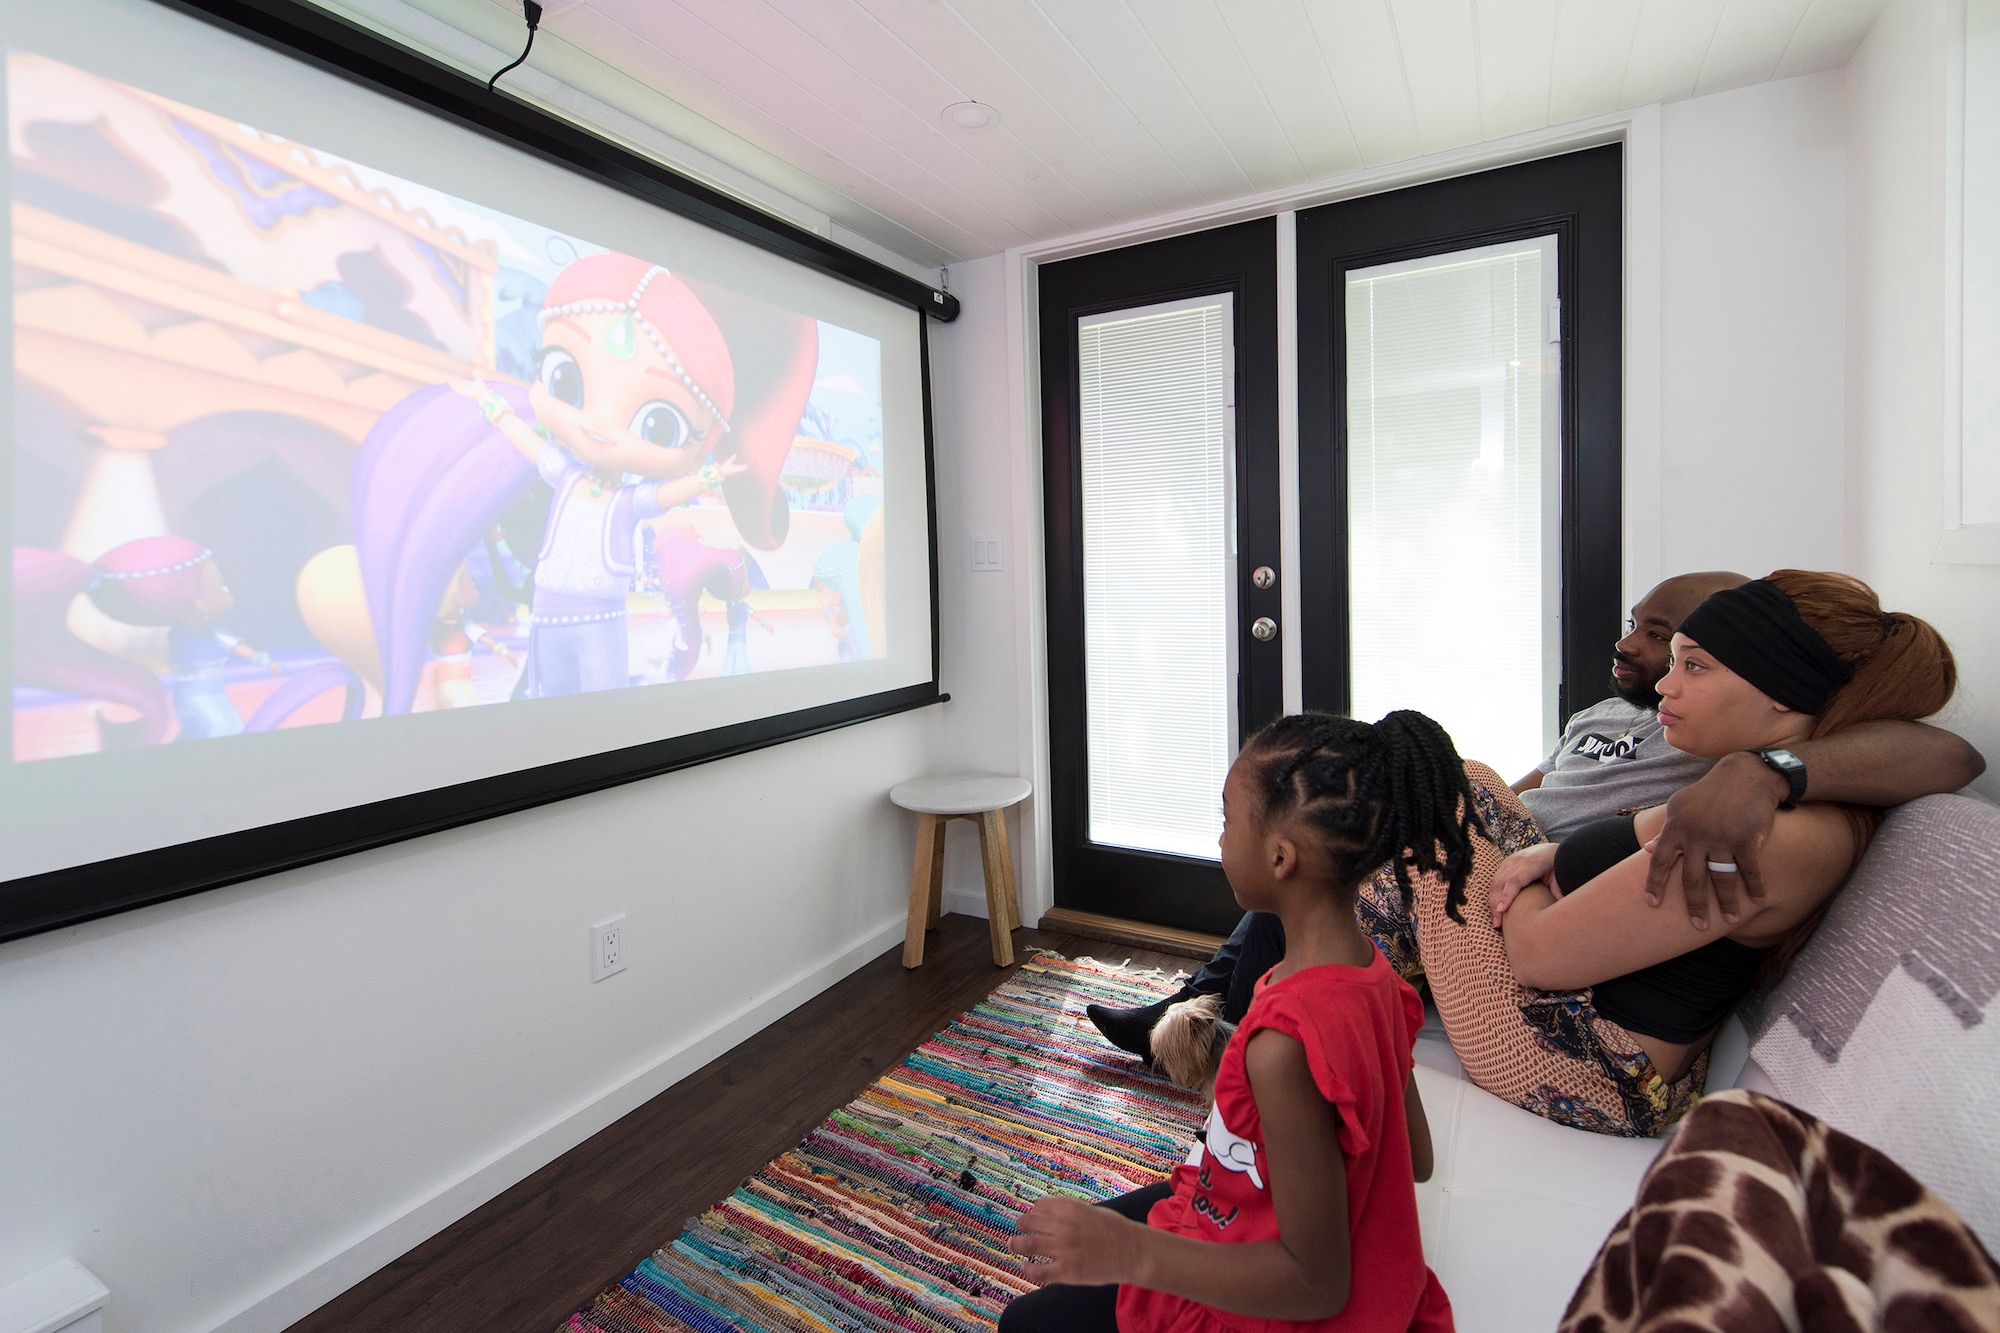 As their 5-year-old daughter enjoys cartoons on their big screen, her parents, Staff Sgt. Kevin and Shanice Inniss relax on the couch in their 400-square-foot "Tiny Home."  Said Inniss, "As important as it was for us to find a place of our own that we could afford, it was equally important for us to be debt-free while pursuing this goal.” The couple is currently stationed at Patrick AFB, Fla., but has orders to relocate to Germany at the end of the year.  (U.S. Air Force photo by Matthew S. Jurgens)